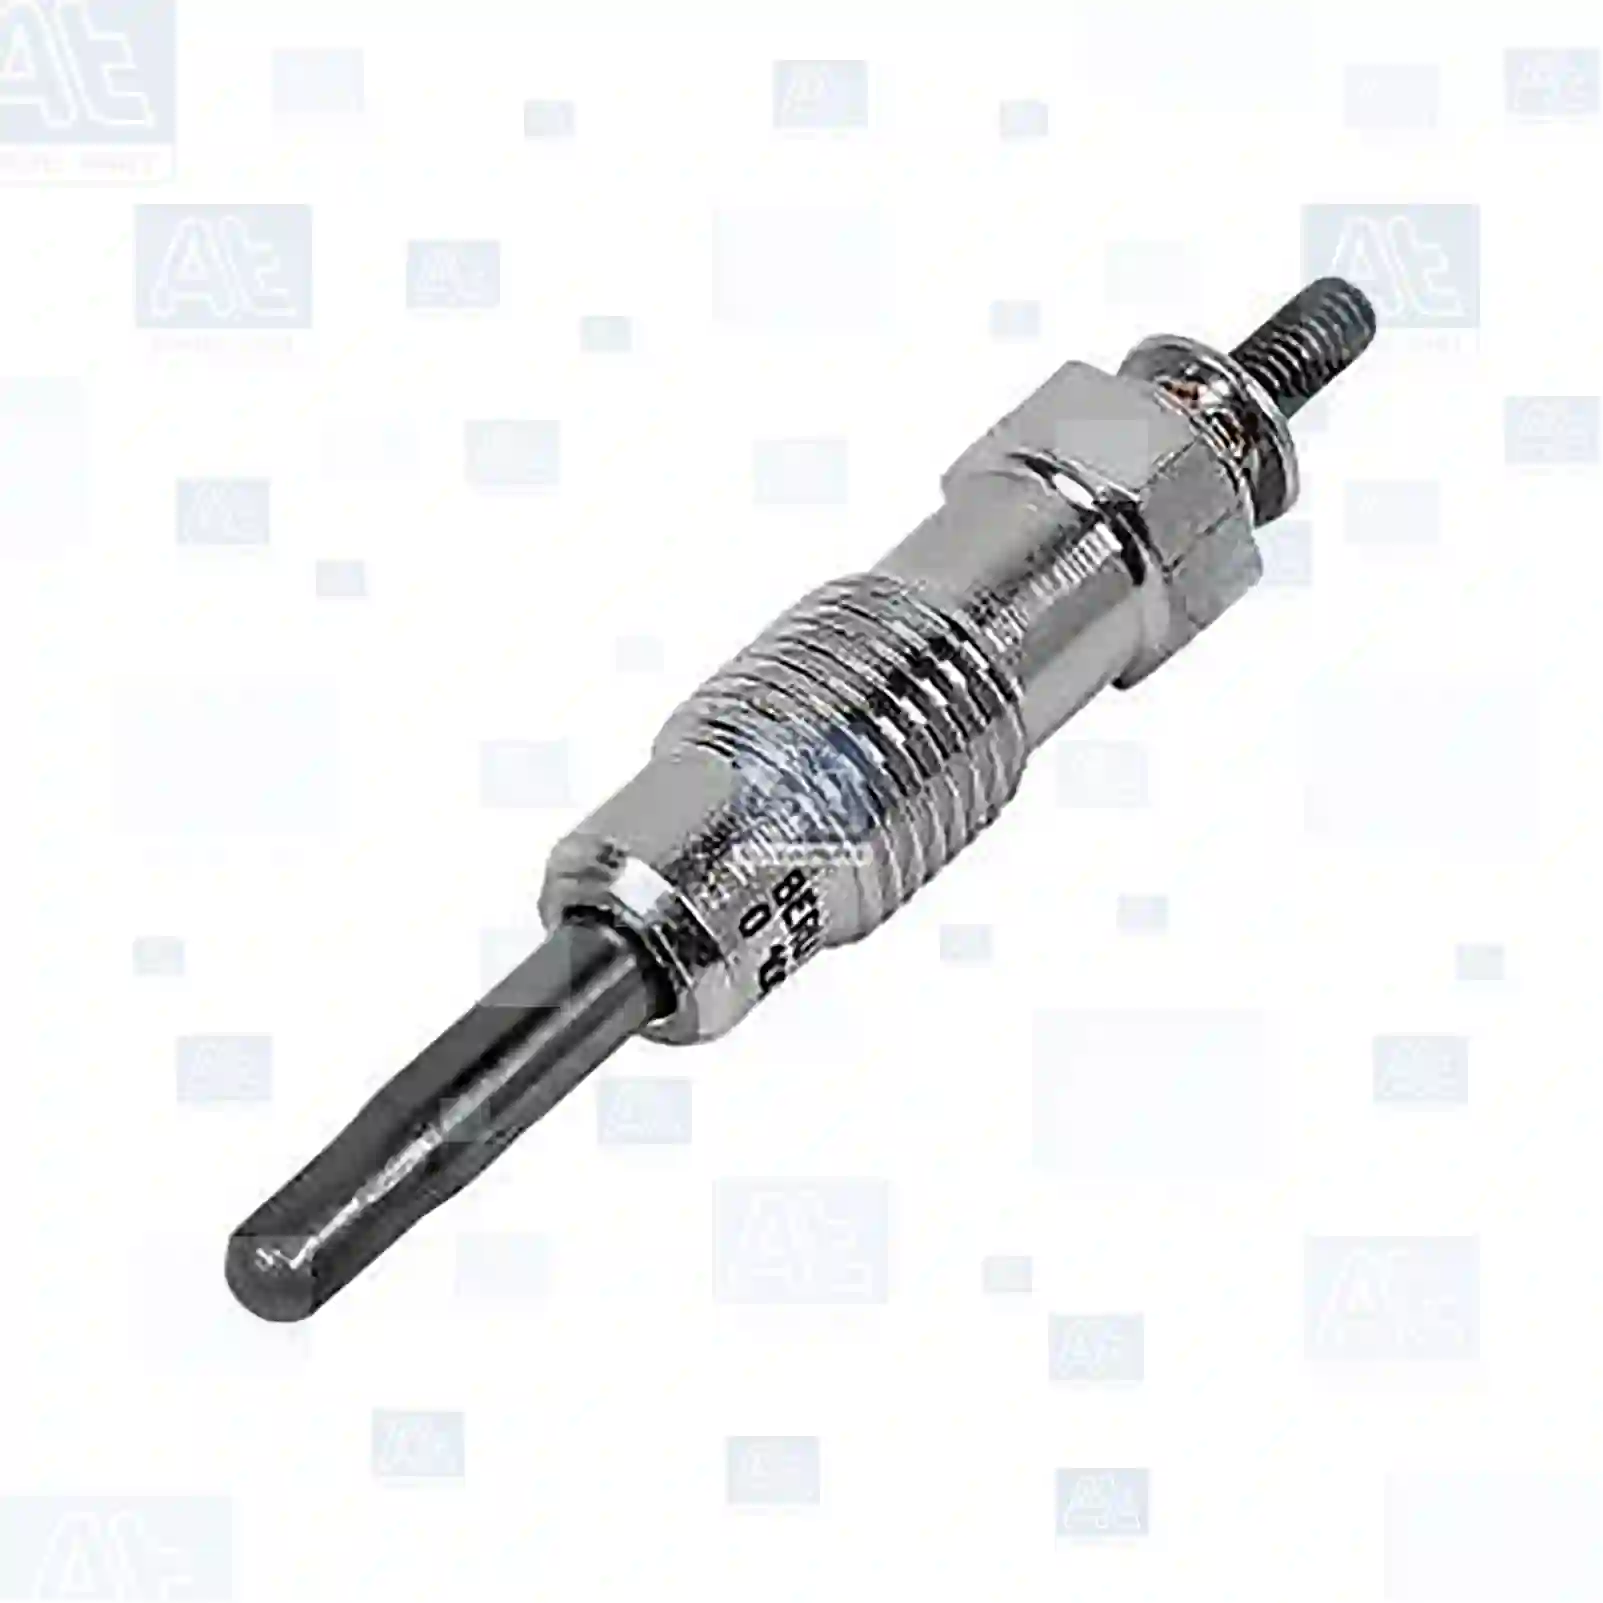 Glow plug, 77700616, 596033, 59621F, 59621W, 5962T7, 9004100280, 9153891099, 9600978380, 9607038880, 8671004849, LBU9954, 07777837, 46447610, 50032391, 71735459, 71735460, 7777837, 98459883, 98462491, 98462492, 98498630, 1649459, 6075812, 6137454, B27SR, B28SR, B42SR, 4403145, 88900732, 88900735, 88900737, 9111145, 98459883, 98462492, 98498630, 00484906, 46447610, 71735459, 98459883, 98462491, 98462492, 4403145, 596033, 59621F, 59621W, 5962T7, 9004100280, 9153891099, 9600978380, 9607038880, 7701040208, 7701414081, 7701414083, 8671004849, NCC10002 ||  77700616 At Spare Part | Engine, Accelerator Pedal, Camshaft, Connecting Rod, Crankcase, Crankshaft, Cylinder Head, Engine Suspension Mountings, Exhaust Manifold, Exhaust Gas Recirculation, Filter Kits, Flywheel Housing, General Overhaul Kits, Engine, Intake Manifold, Oil Cleaner, Oil Cooler, Oil Filter, Oil Pump, Oil Sump, Piston & Liner, Sensor & Switch, Timing Case, Turbocharger, Cooling System, Belt Tensioner, Coolant Filter, Coolant Pipe, Corrosion Prevention Agent, Drive, Expansion Tank, Fan, Intercooler, Monitors & Gauges, Radiator, Thermostat, V-Belt / Timing belt, Water Pump, Fuel System, Electronical Injector Unit, Feed Pump, Fuel Filter, cpl., Fuel Gauge Sender,  Fuel Line, Fuel Pump, Fuel Tank, Injection Line Kit, Injection Pump, Exhaust System, Clutch & Pedal, Gearbox, Propeller Shaft, Axles, Brake System, Hubs & Wheels, Suspension, Leaf Spring, Universal Parts / Accessories, Steering, Electrical System, Cabin Glow plug, 77700616, 596033, 59621F, 59621W, 5962T7, 9004100280, 9153891099, 9600978380, 9607038880, 8671004849, LBU9954, 07777837, 46447610, 50032391, 71735459, 71735460, 7777837, 98459883, 98462491, 98462492, 98498630, 1649459, 6075812, 6137454, B27SR, B28SR, B42SR, 4403145, 88900732, 88900735, 88900737, 9111145, 98459883, 98462492, 98498630, 00484906, 46447610, 71735459, 98459883, 98462491, 98462492, 4403145, 596033, 59621F, 59621W, 5962T7, 9004100280, 9153891099, 9600978380, 9607038880, 7701040208, 7701414081, 7701414083, 8671004849, NCC10002 ||  77700616 At Spare Part | Engine, Accelerator Pedal, Camshaft, Connecting Rod, Crankcase, Crankshaft, Cylinder Head, Engine Suspension Mountings, Exhaust Manifold, Exhaust Gas Recirculation, Filter Kits, Flywheel Housing, General Overhaul Kits, Engine, Intake Manifold, Oil Cleaner, Oil Cooler, Oil Filter, Oil Pump, Oil Sump, Piston & Liner, Sensor & Switch, Timing Case, Turbocharger, Cooling System, Belt Tensioner, Coolant Filter, Coolant Pipe, Corrosion Prevention Agent, Drive, Expansion Tank, Fan, Intercooler, Monitors & Gauges, Radiator, Thermostat, V-Belt / Timing belt, Water Pump, Fuel System, Electronical Injector Unit, Feed Pump, Fuel Filter, cpl., Fuel Gauge Sender,  Fuel Line, Fuel Pump, Fuel Tank, Injection Line Kit, Injection Pump, Exhaust System, Clutch & Pedal, Gearbox, Propeller Shaft, Axles, Brake System, Hubs & Wheels, Suspension, Leaf Spring, Universal Parts / Accessories, Steering, Electrical System, Cabin